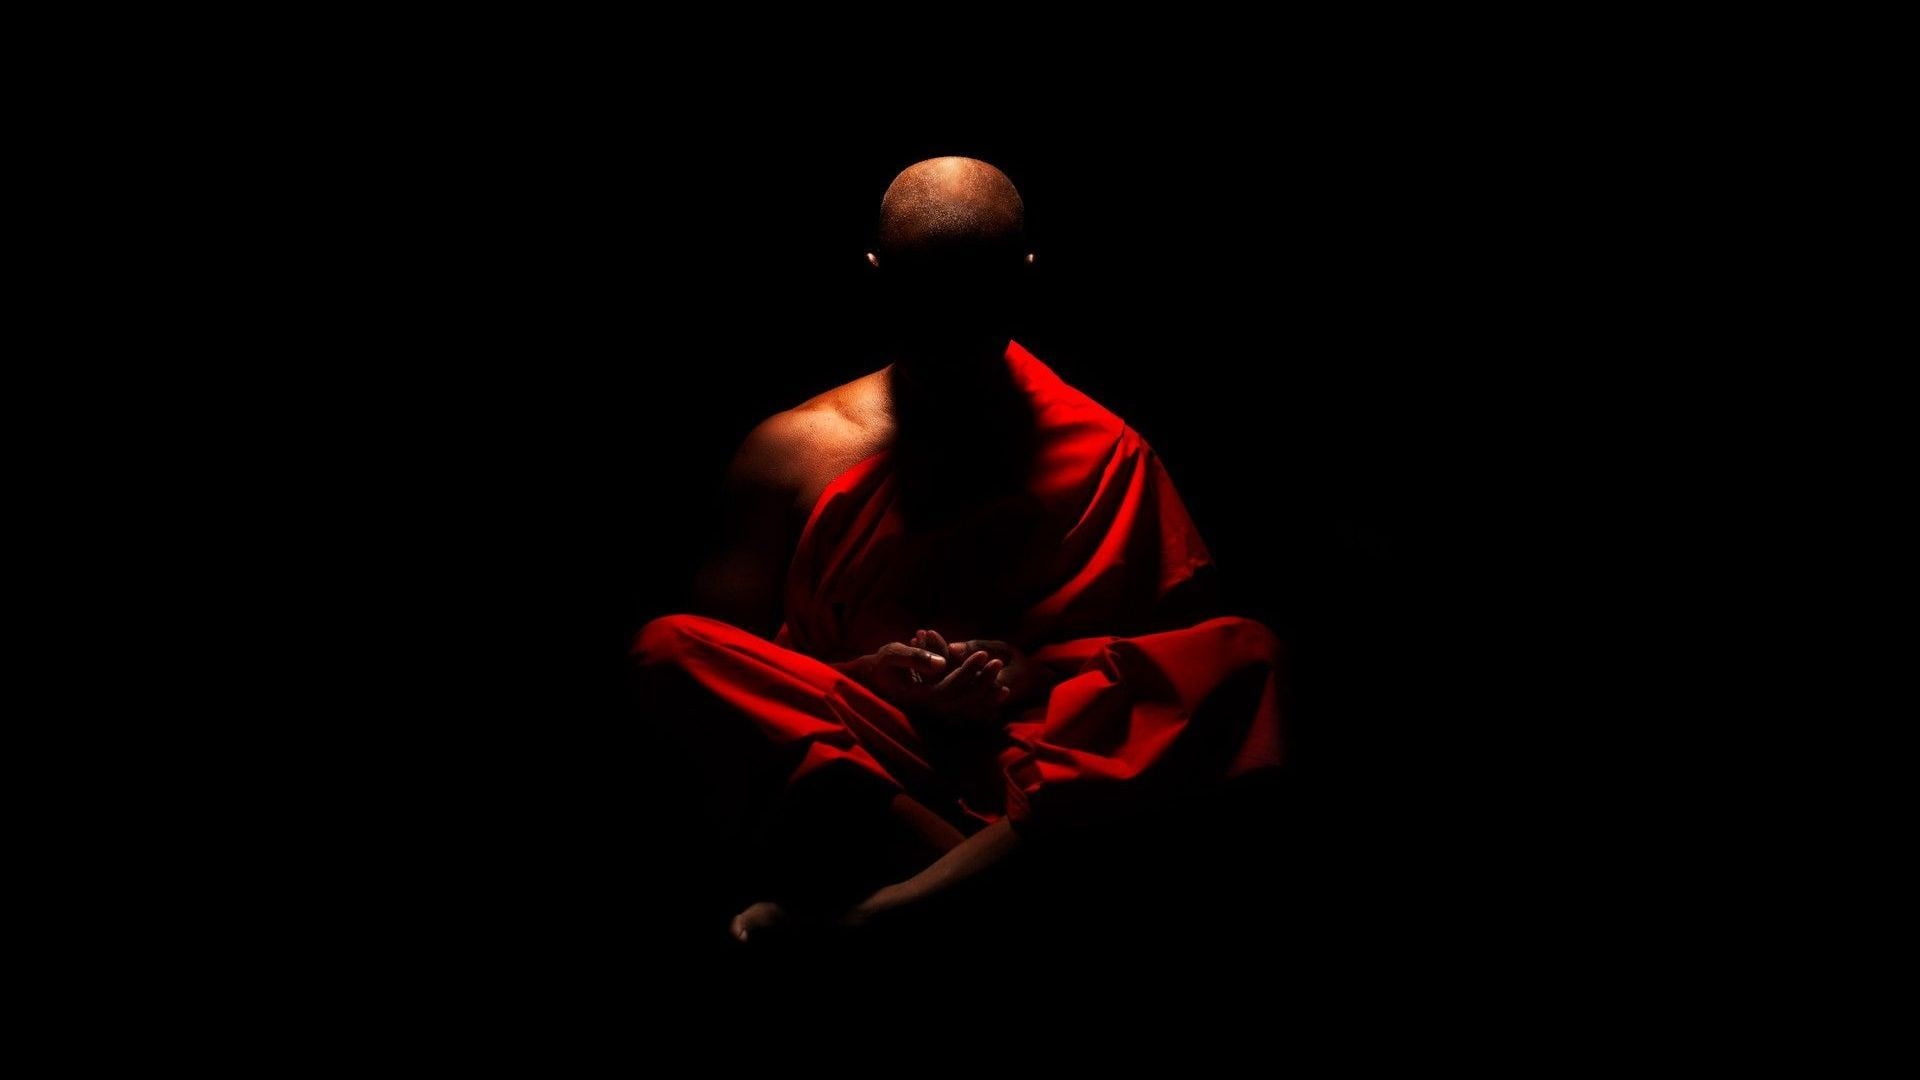 black, red, darkness, shadows, monk, black and red, relax, harmony